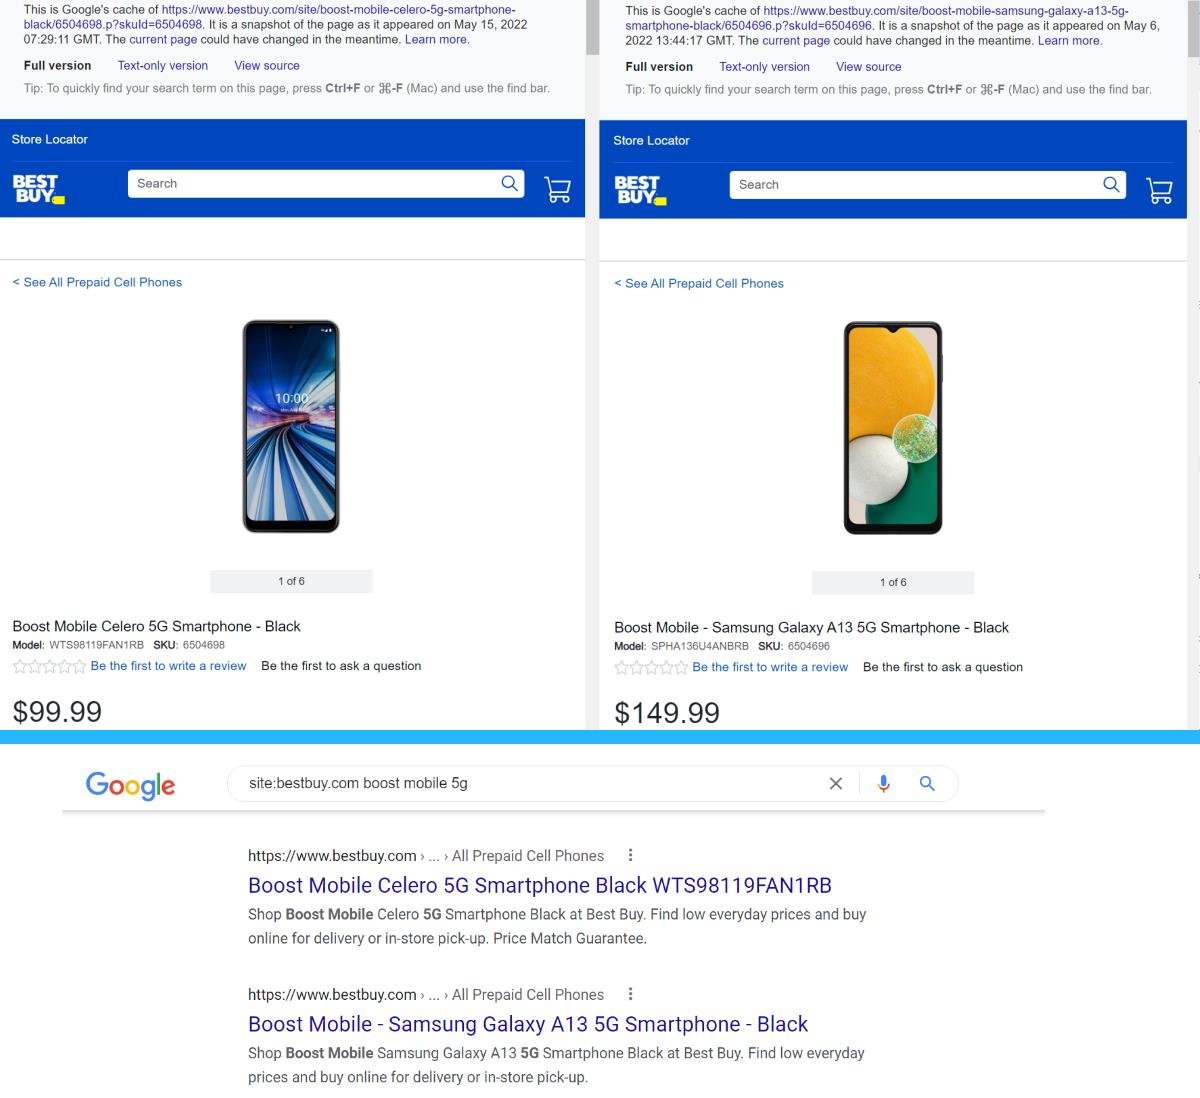 Google Search And Web Caches Show Upcoming Boost Mobile Launch Online At Best Buy